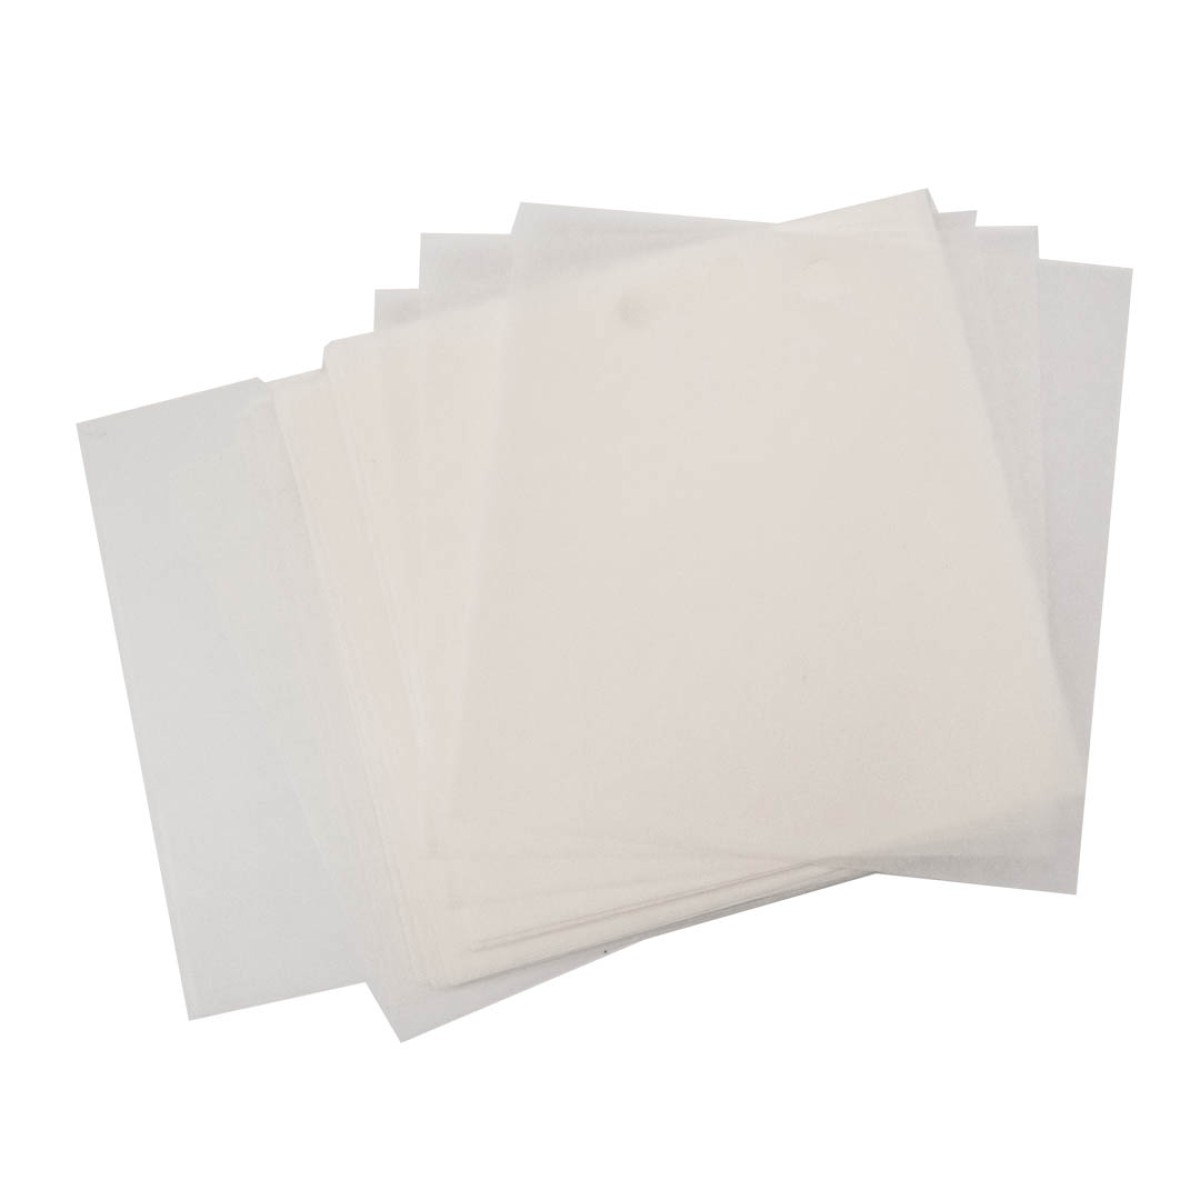 PAPER PATTY WAXED 112x112 HP HOLLYMATIC